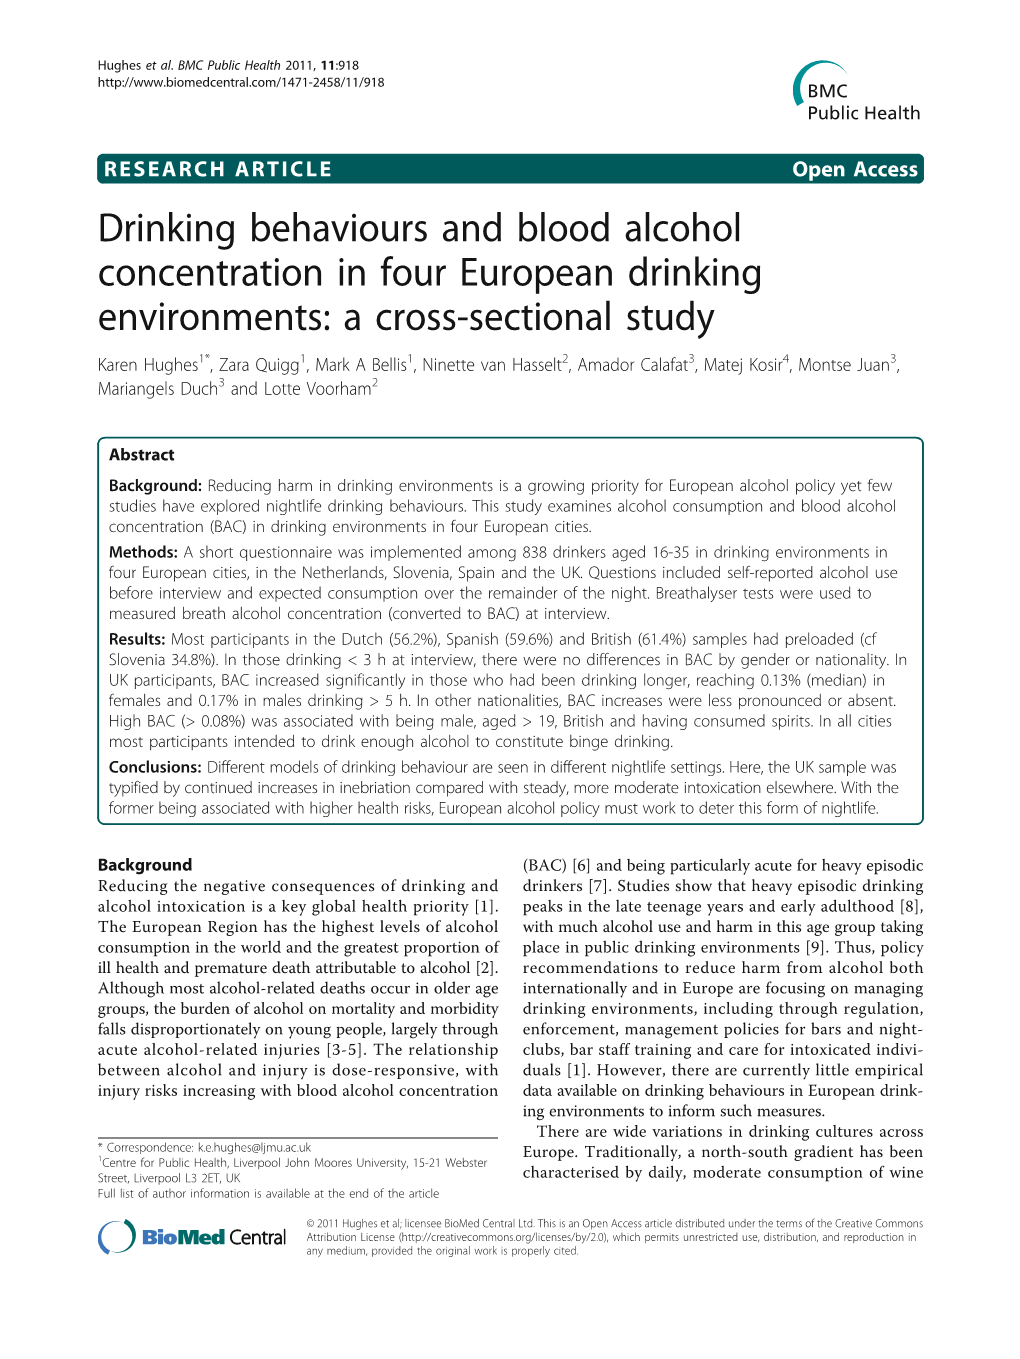 Drinking Behaviours and Blood Alcohol